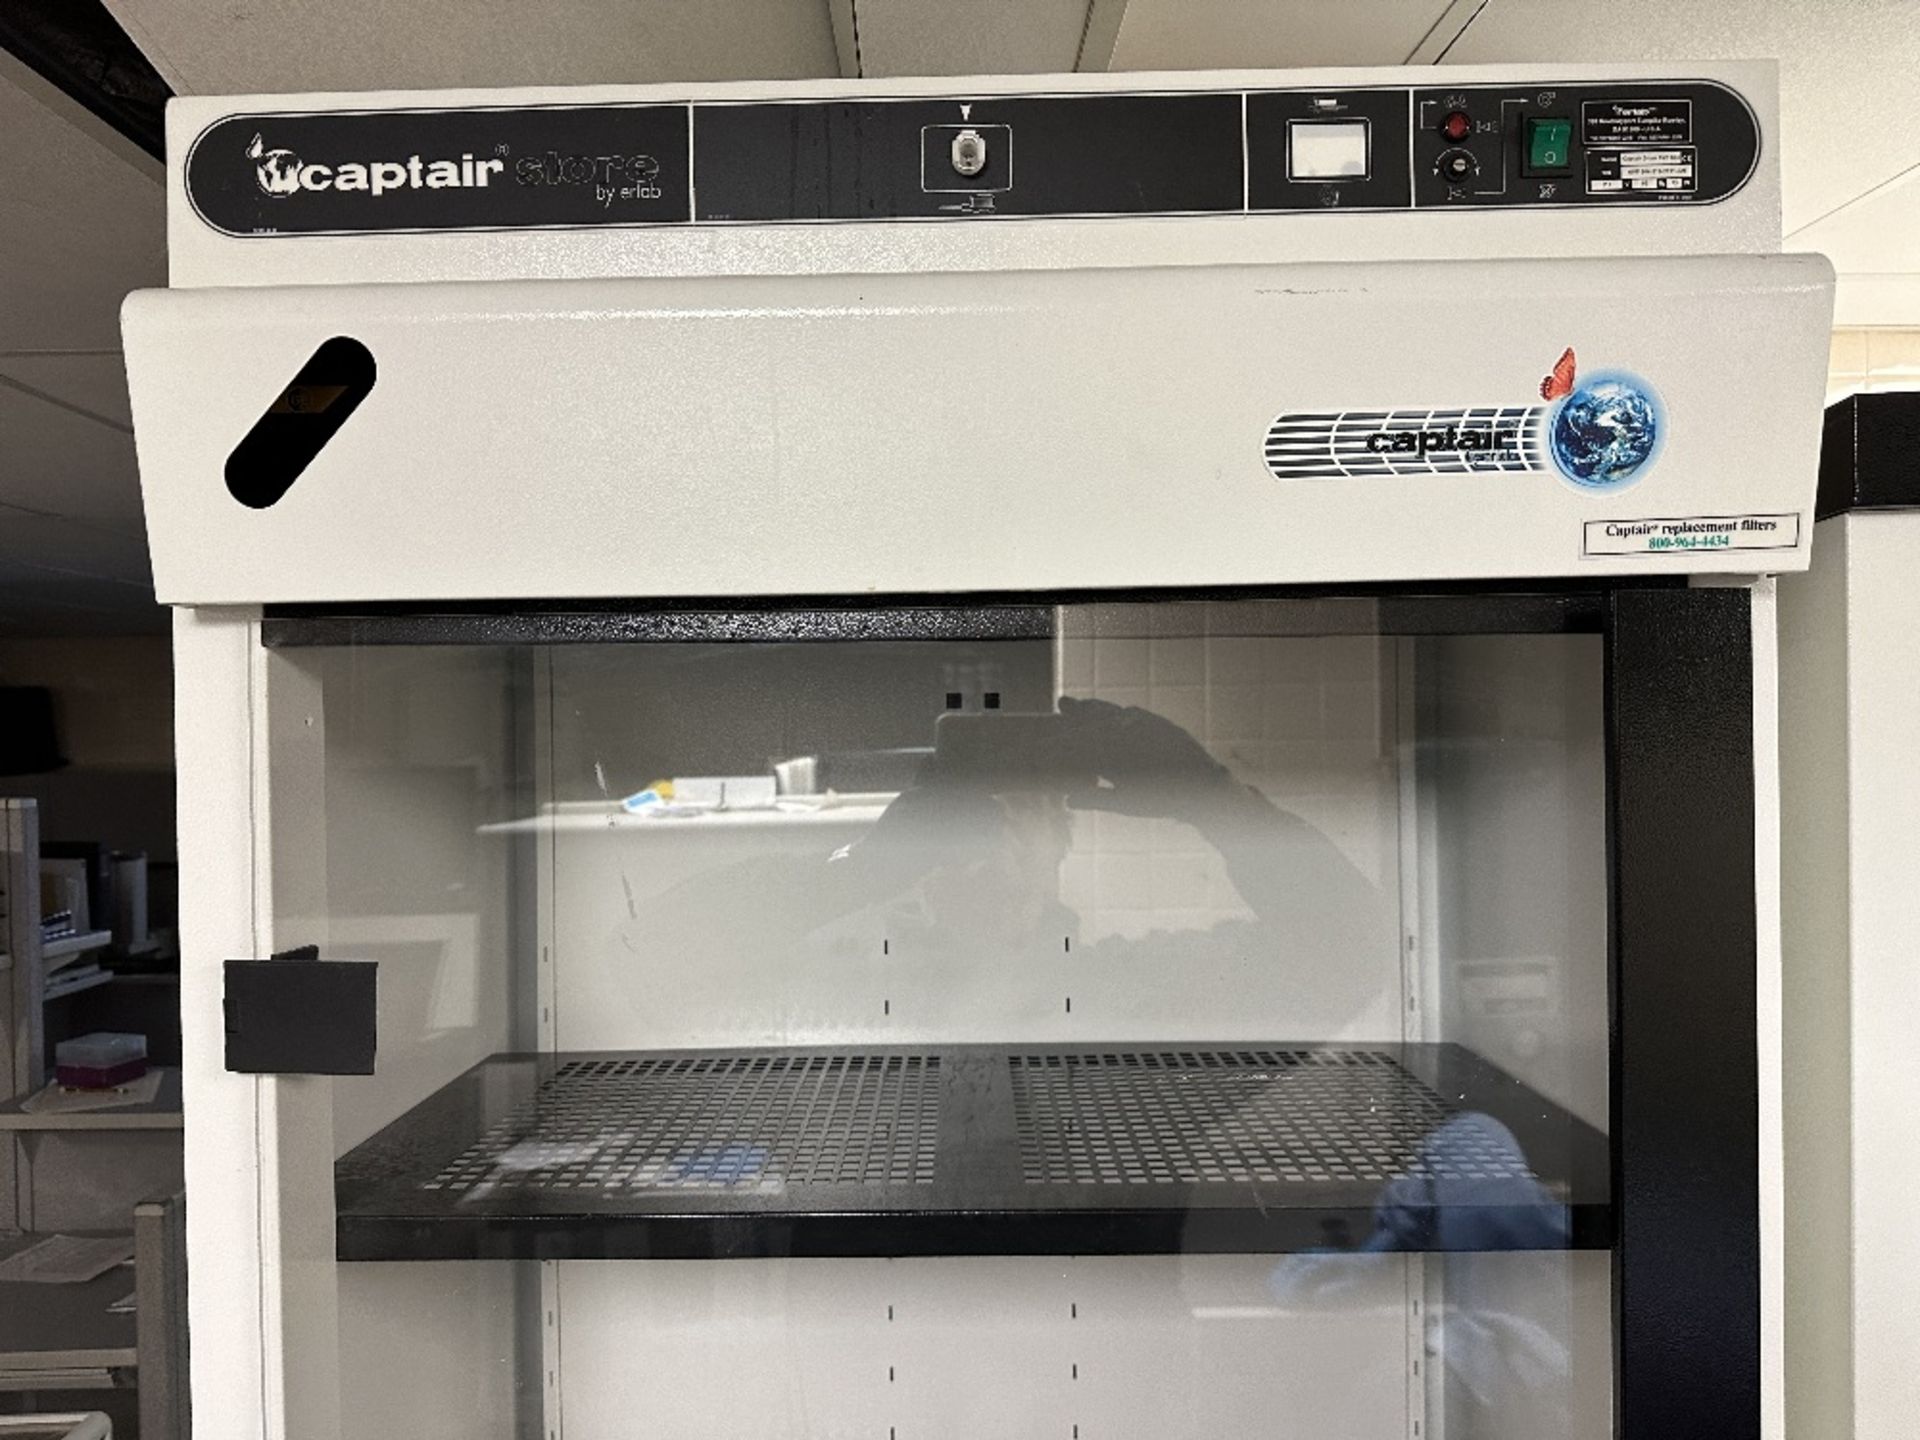 Erlab Captair Store Chemical Cabinet AVPS 804 (LOCATED IN MIDDLETOWN, N.Y.)-FOR PACKAGING & SHIPPING - Image 2 of 3